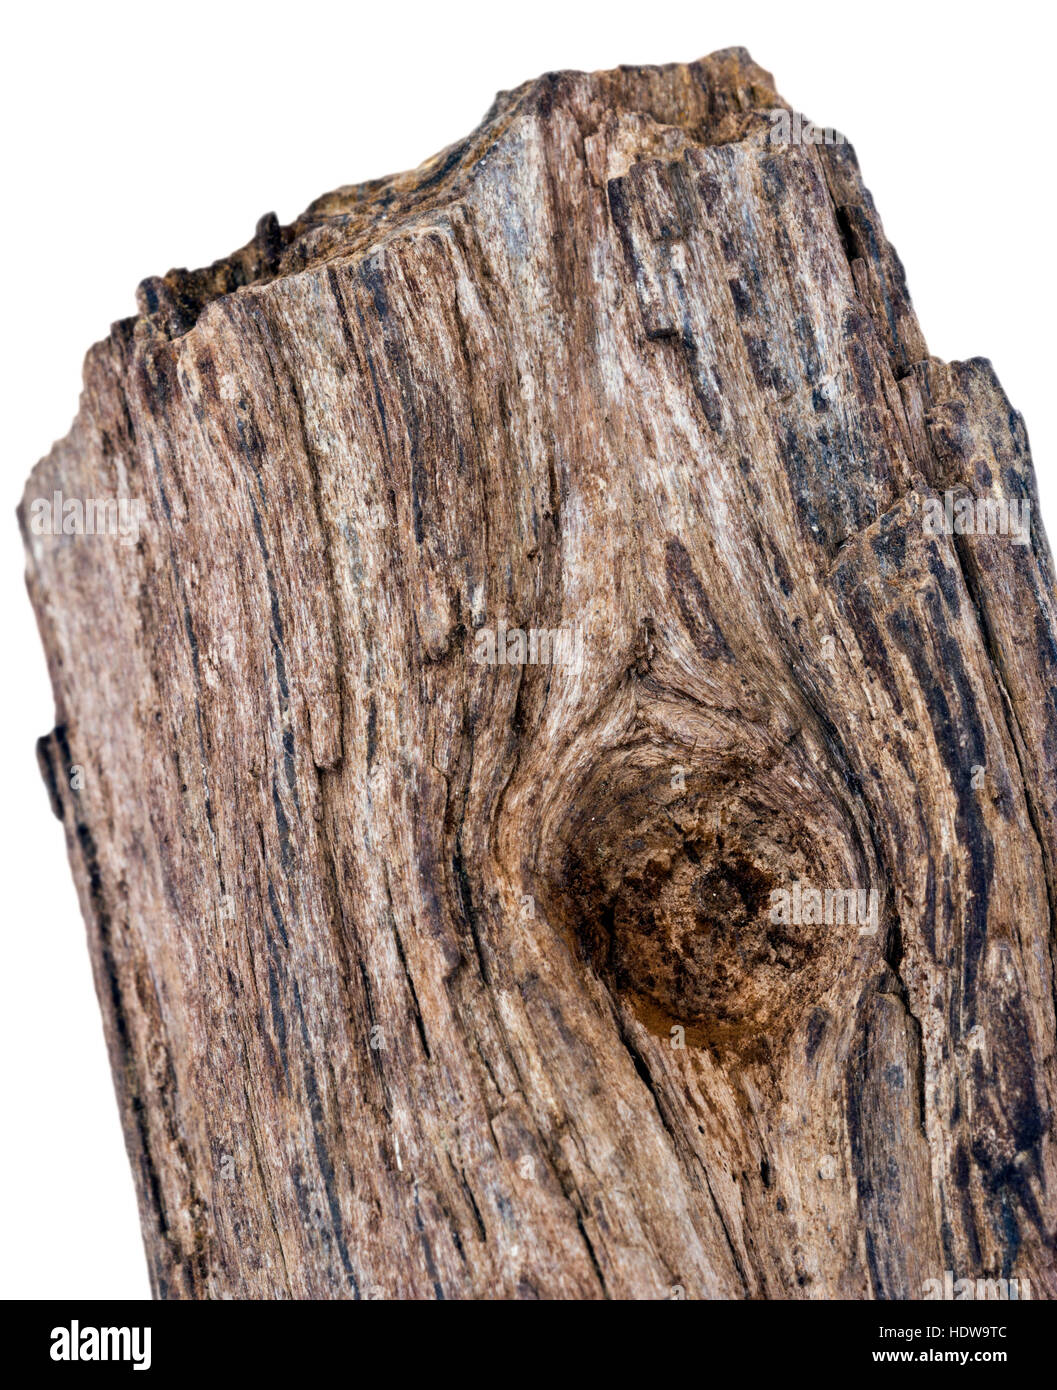 Piece of fossilised wood collected from Cretaceous sediments in Siberia Stock Photo